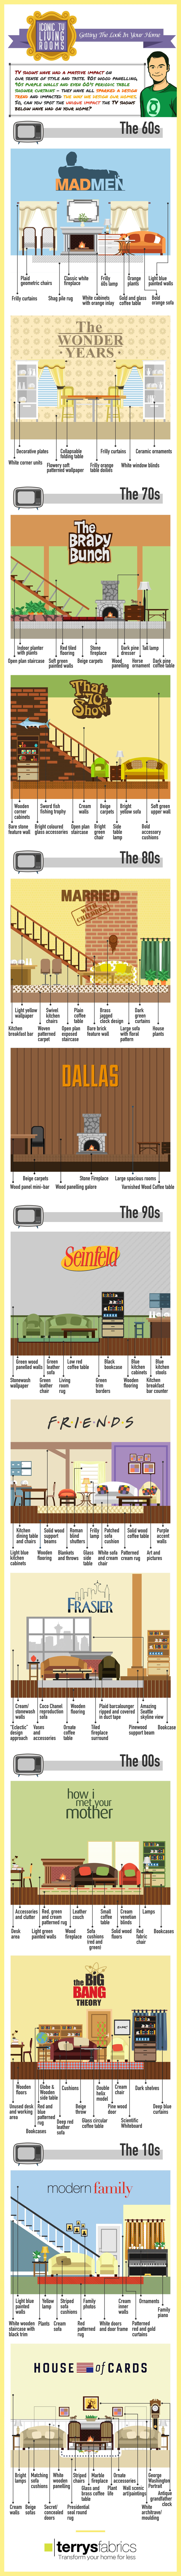 Iconic-TV-Living-Rooms-Infographic